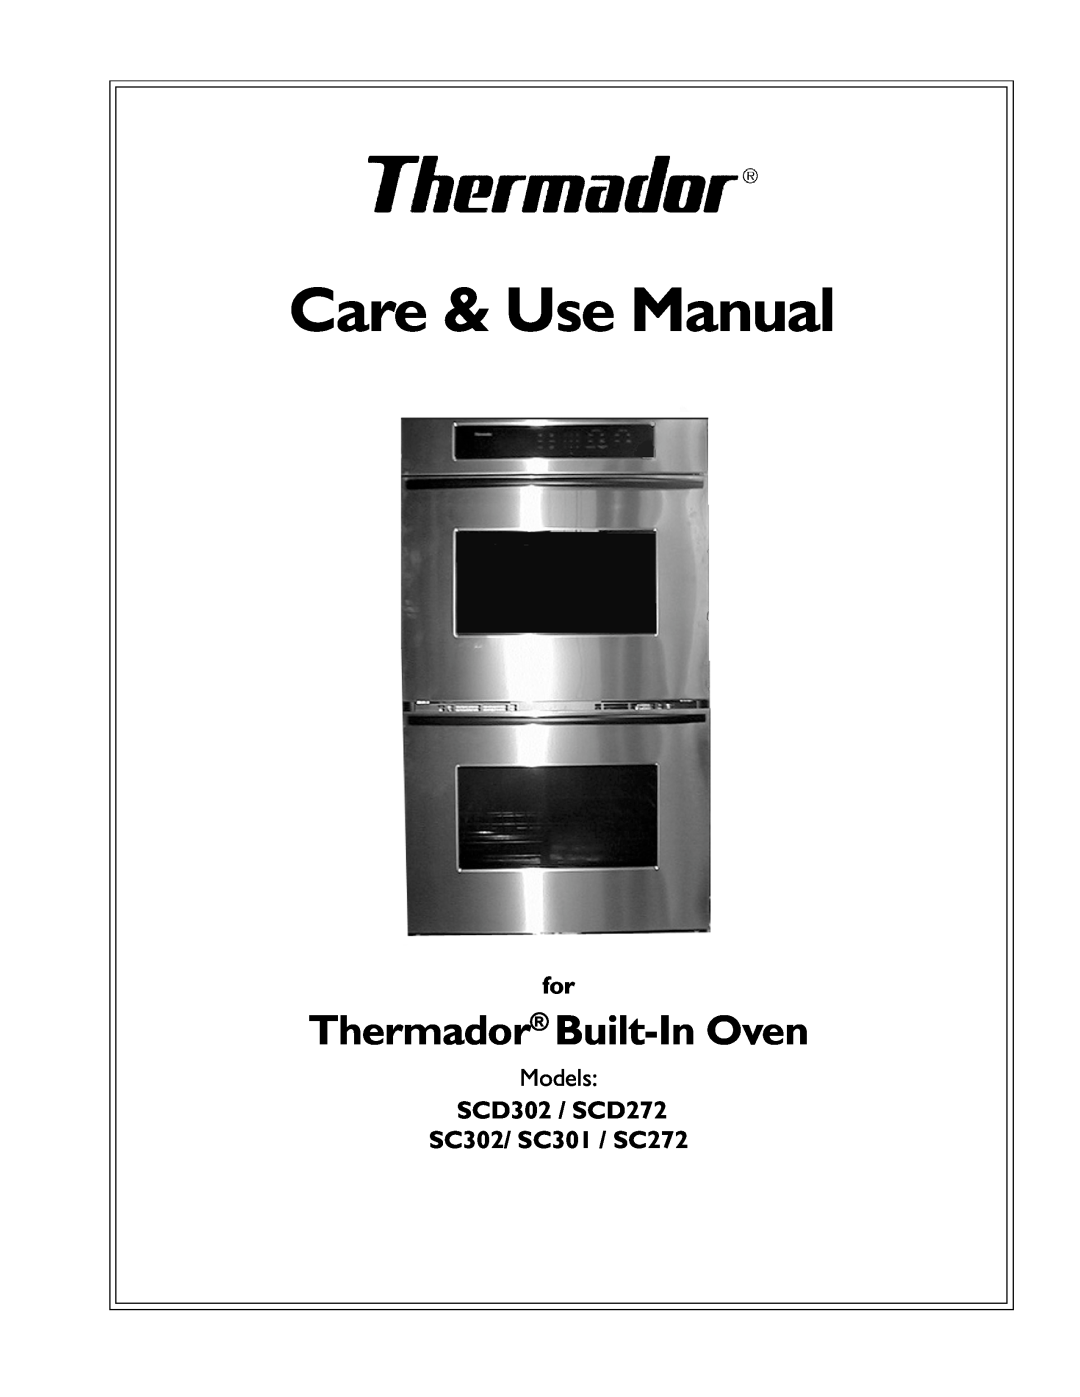 Thermador manual Thermador Built-In Oven, SCD302 / SCD272 SC302/ SC301 / SC272, Care & Use Manual, Models 